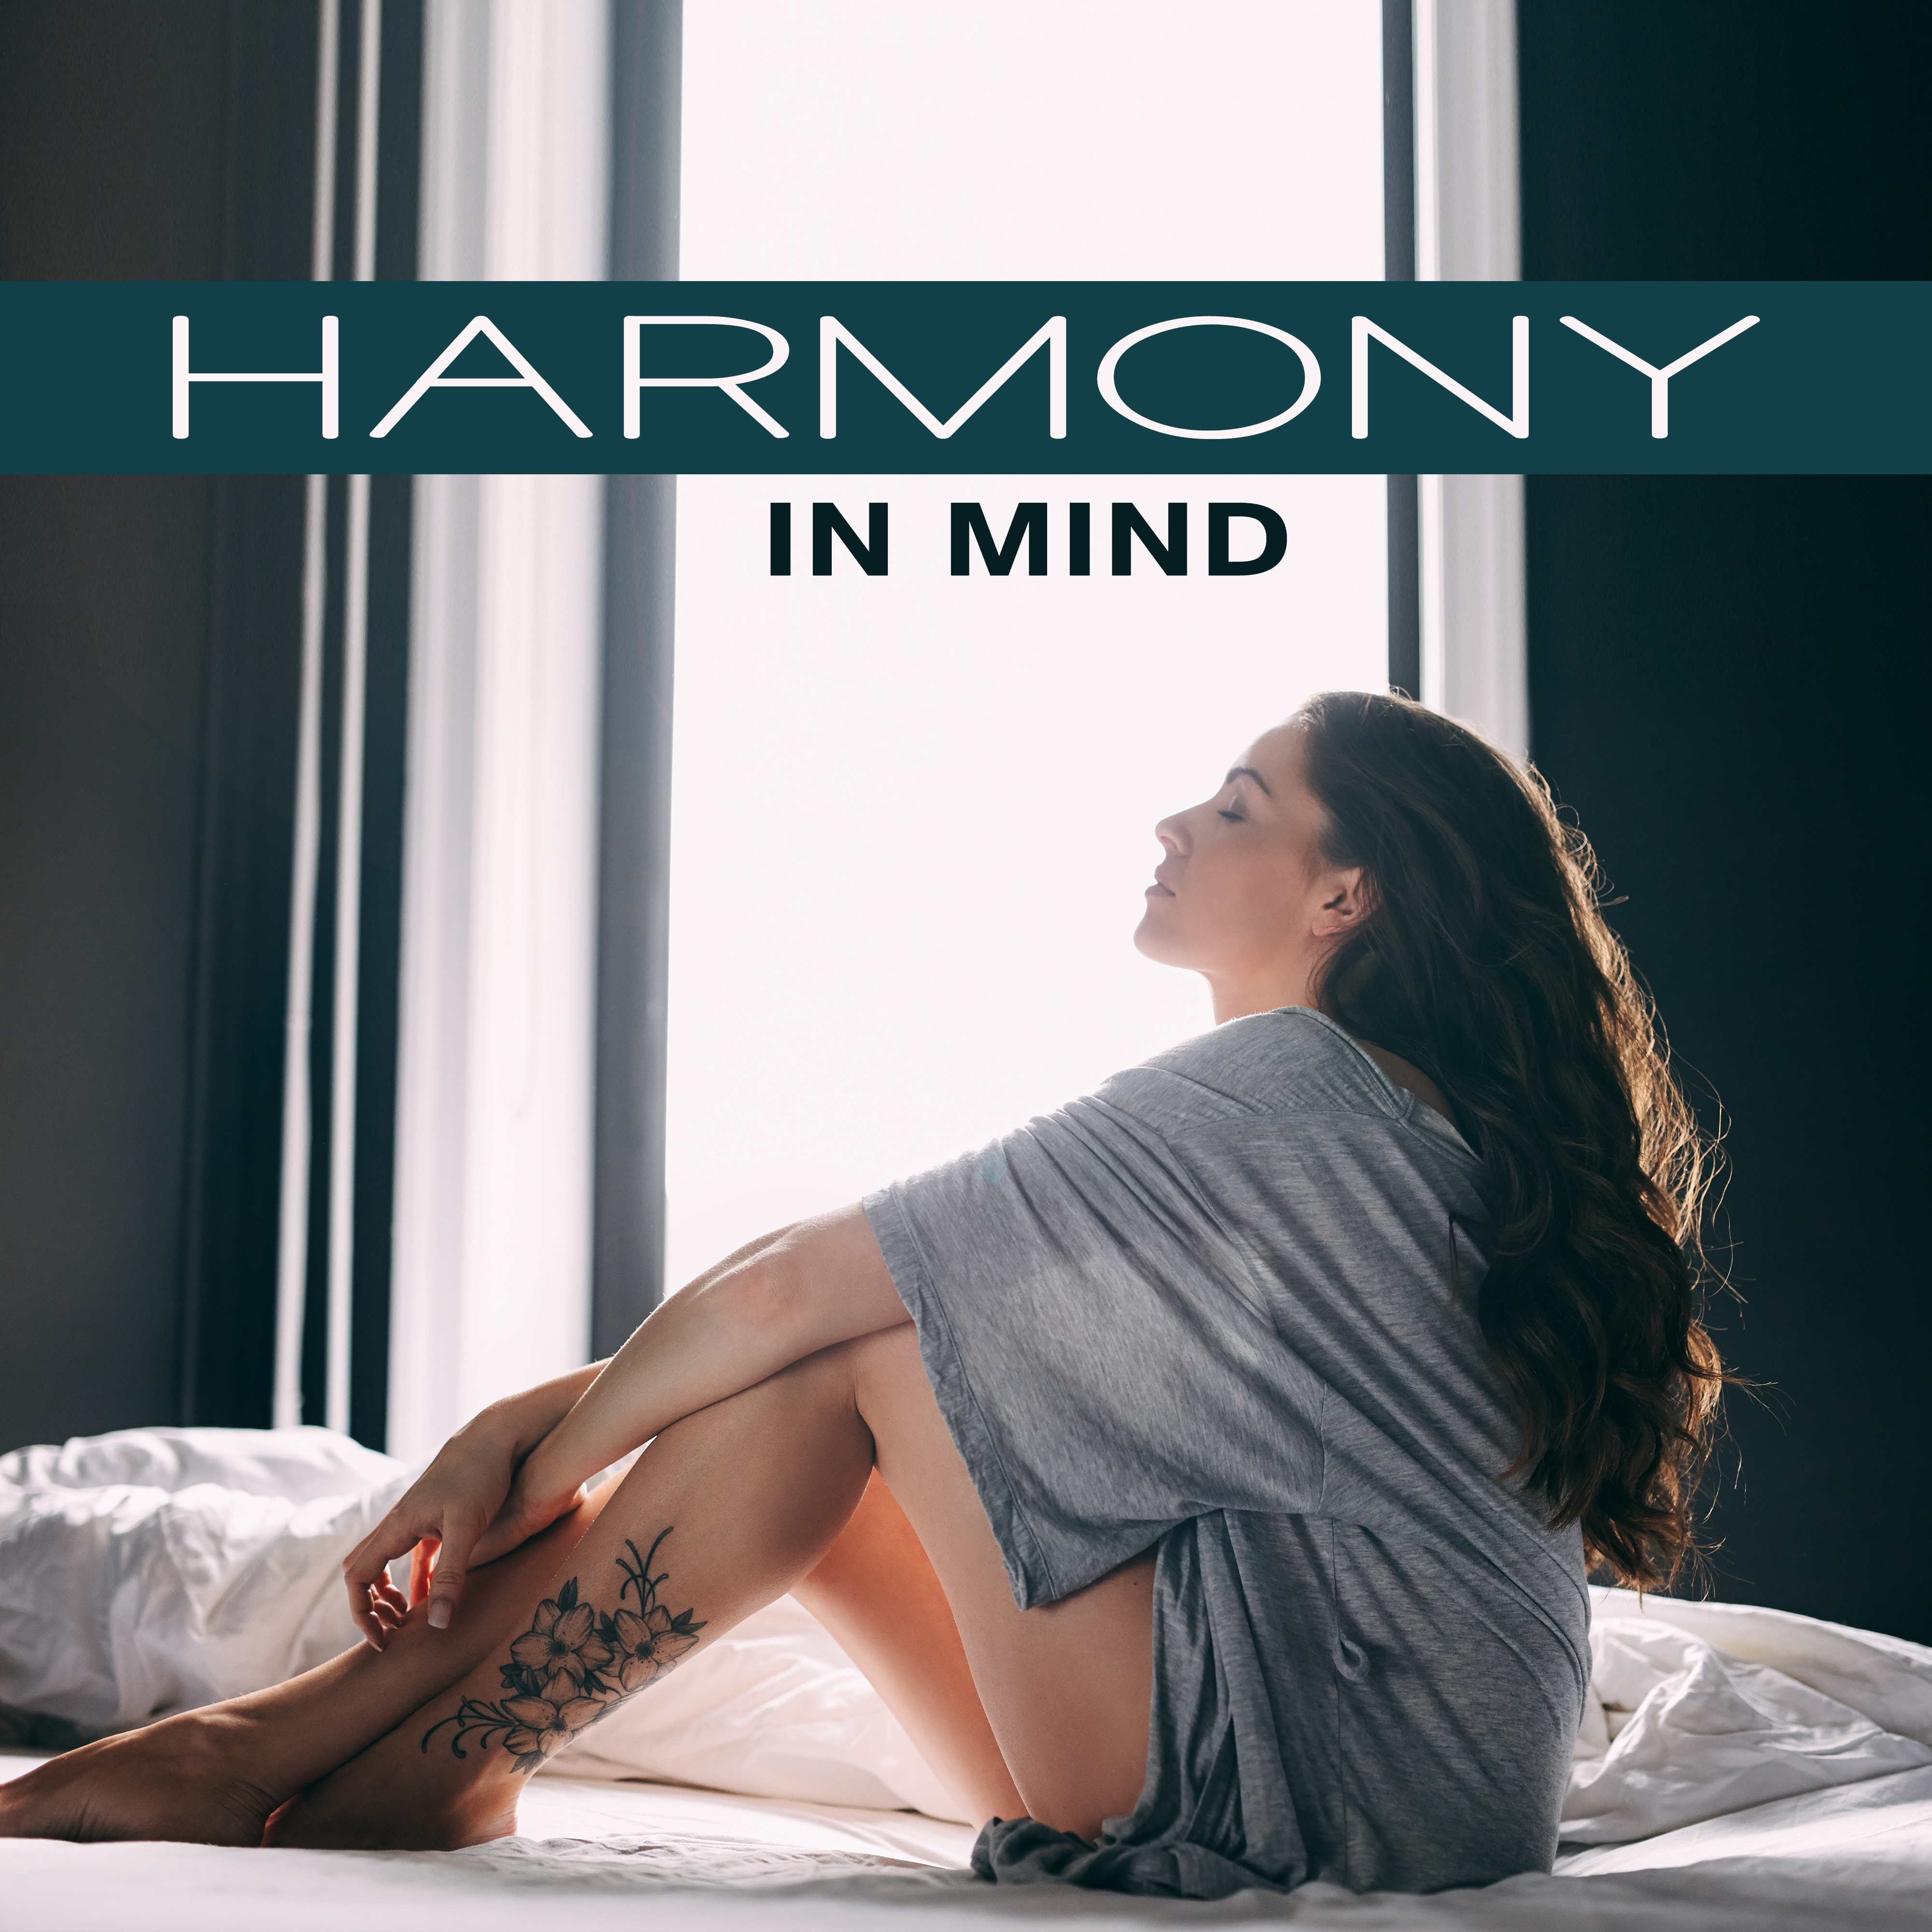 Harmony in Mind – Soft Music, Therapy Sounds, Deep Sleep, Meditation, Inner Balance, Zen, Relax, Calm Down